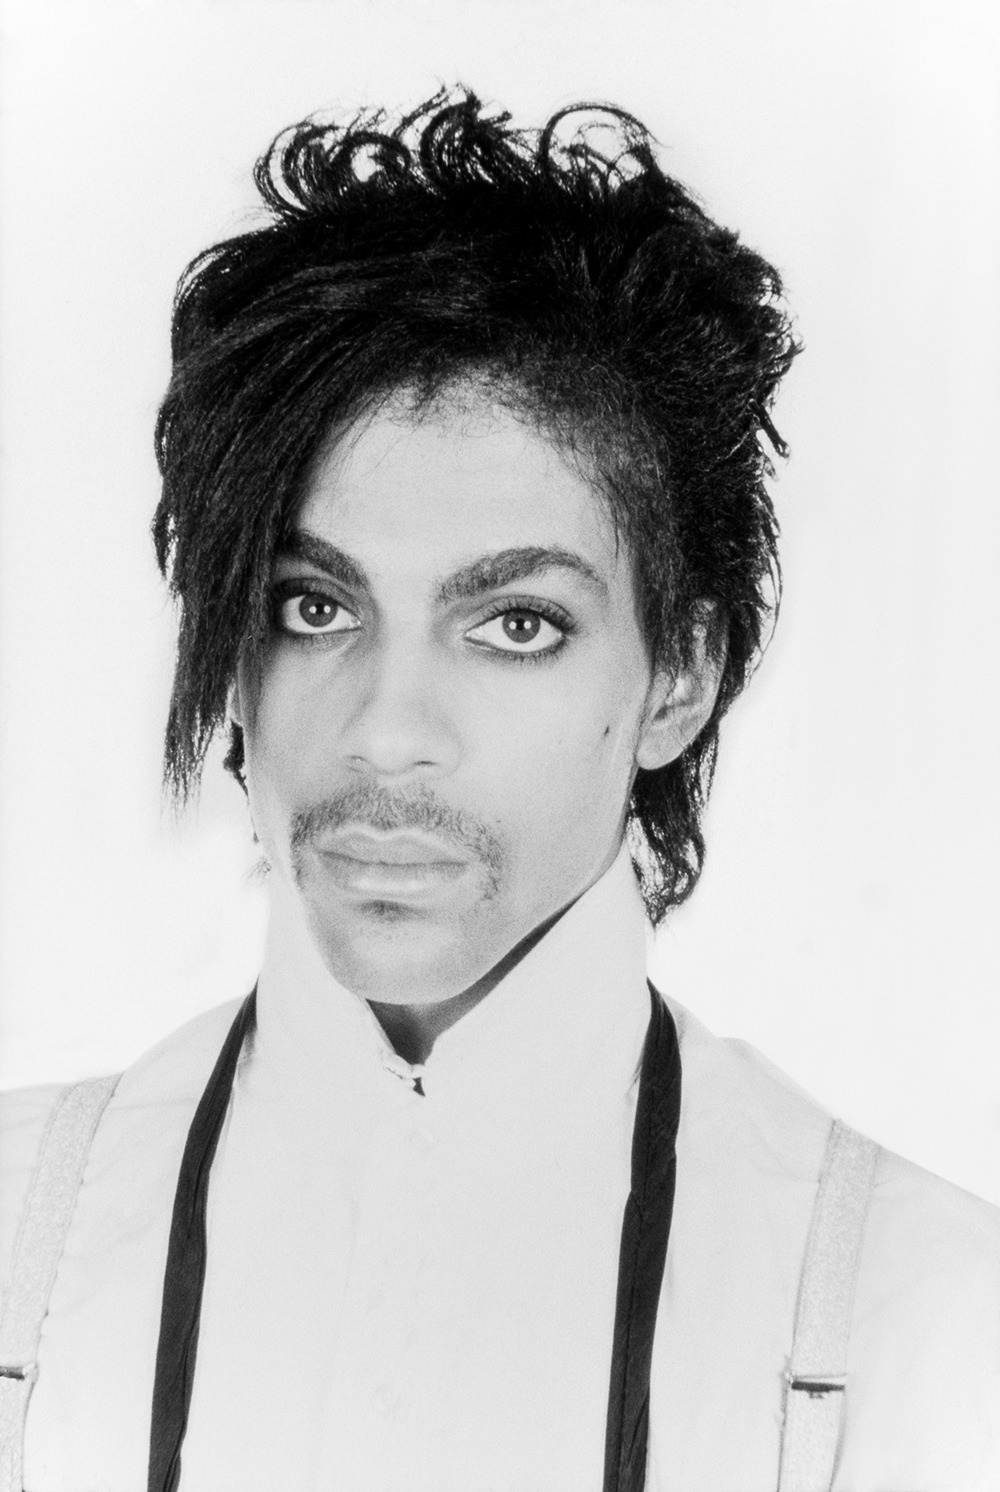 One of Lynn Goldsmith's original 1981 black and white images of musician Prince